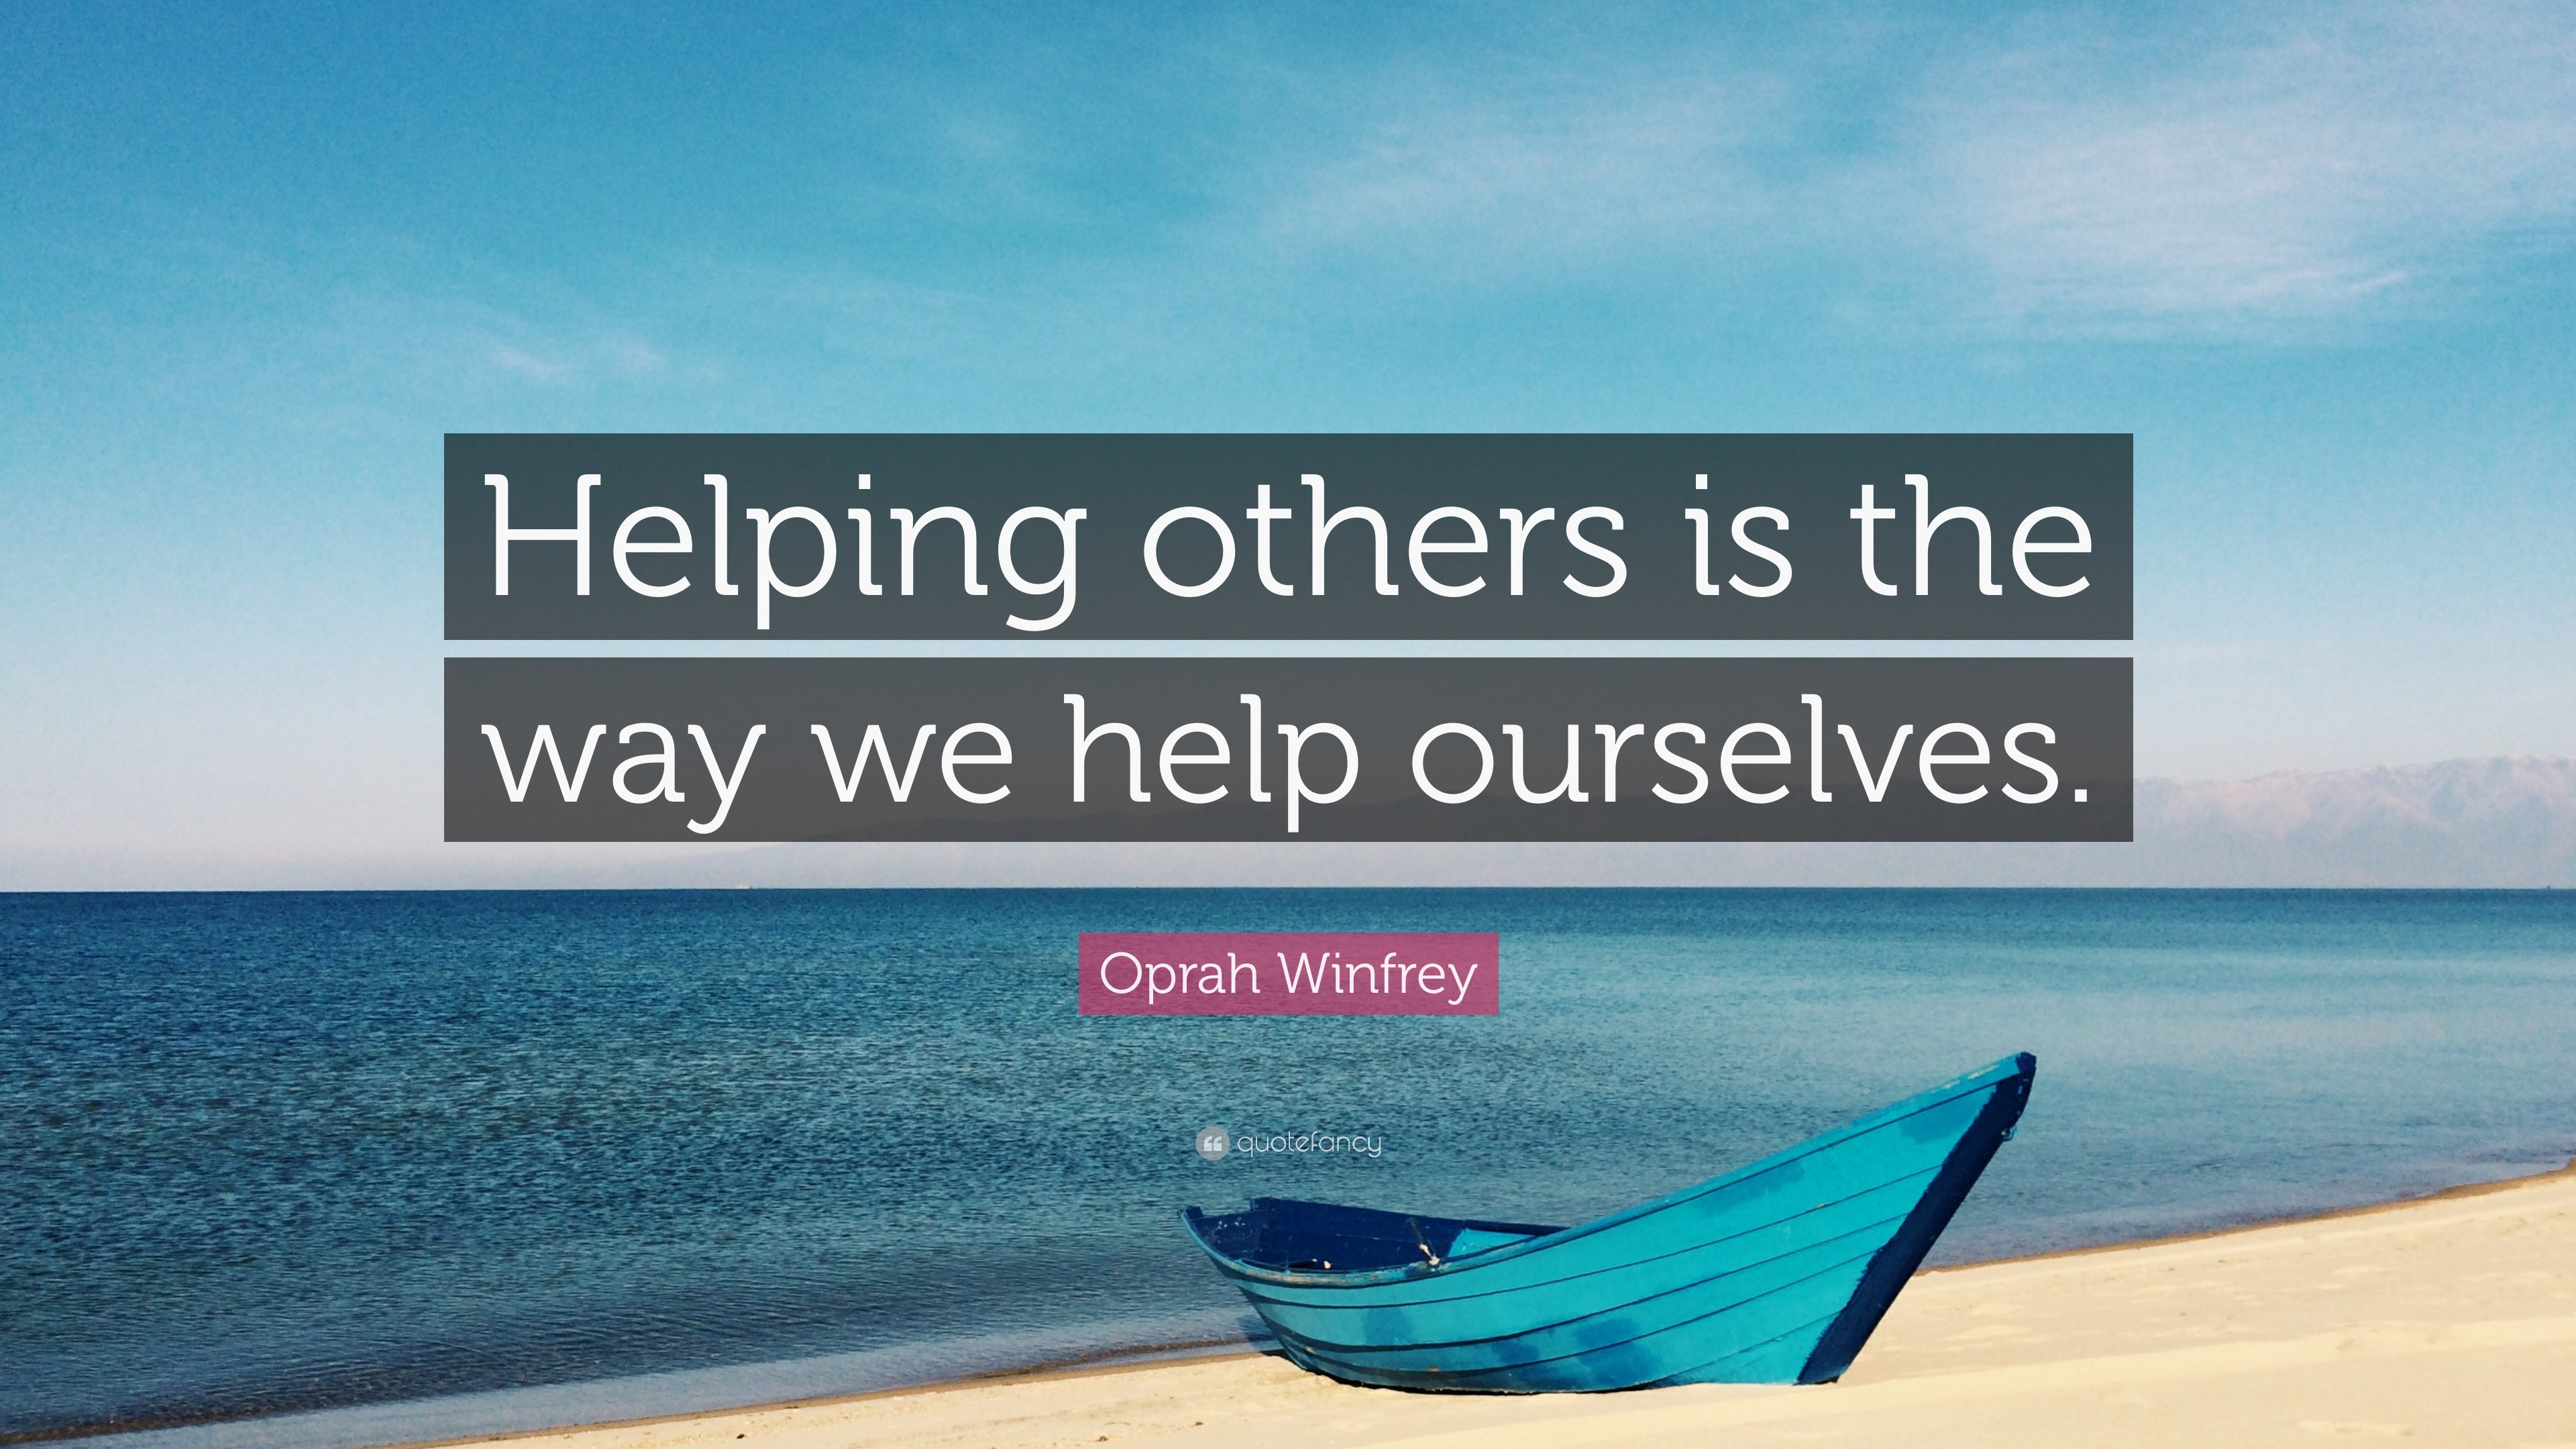 Oprah Winfrey Quote: “Helping others is the way we help ourselves.” (12